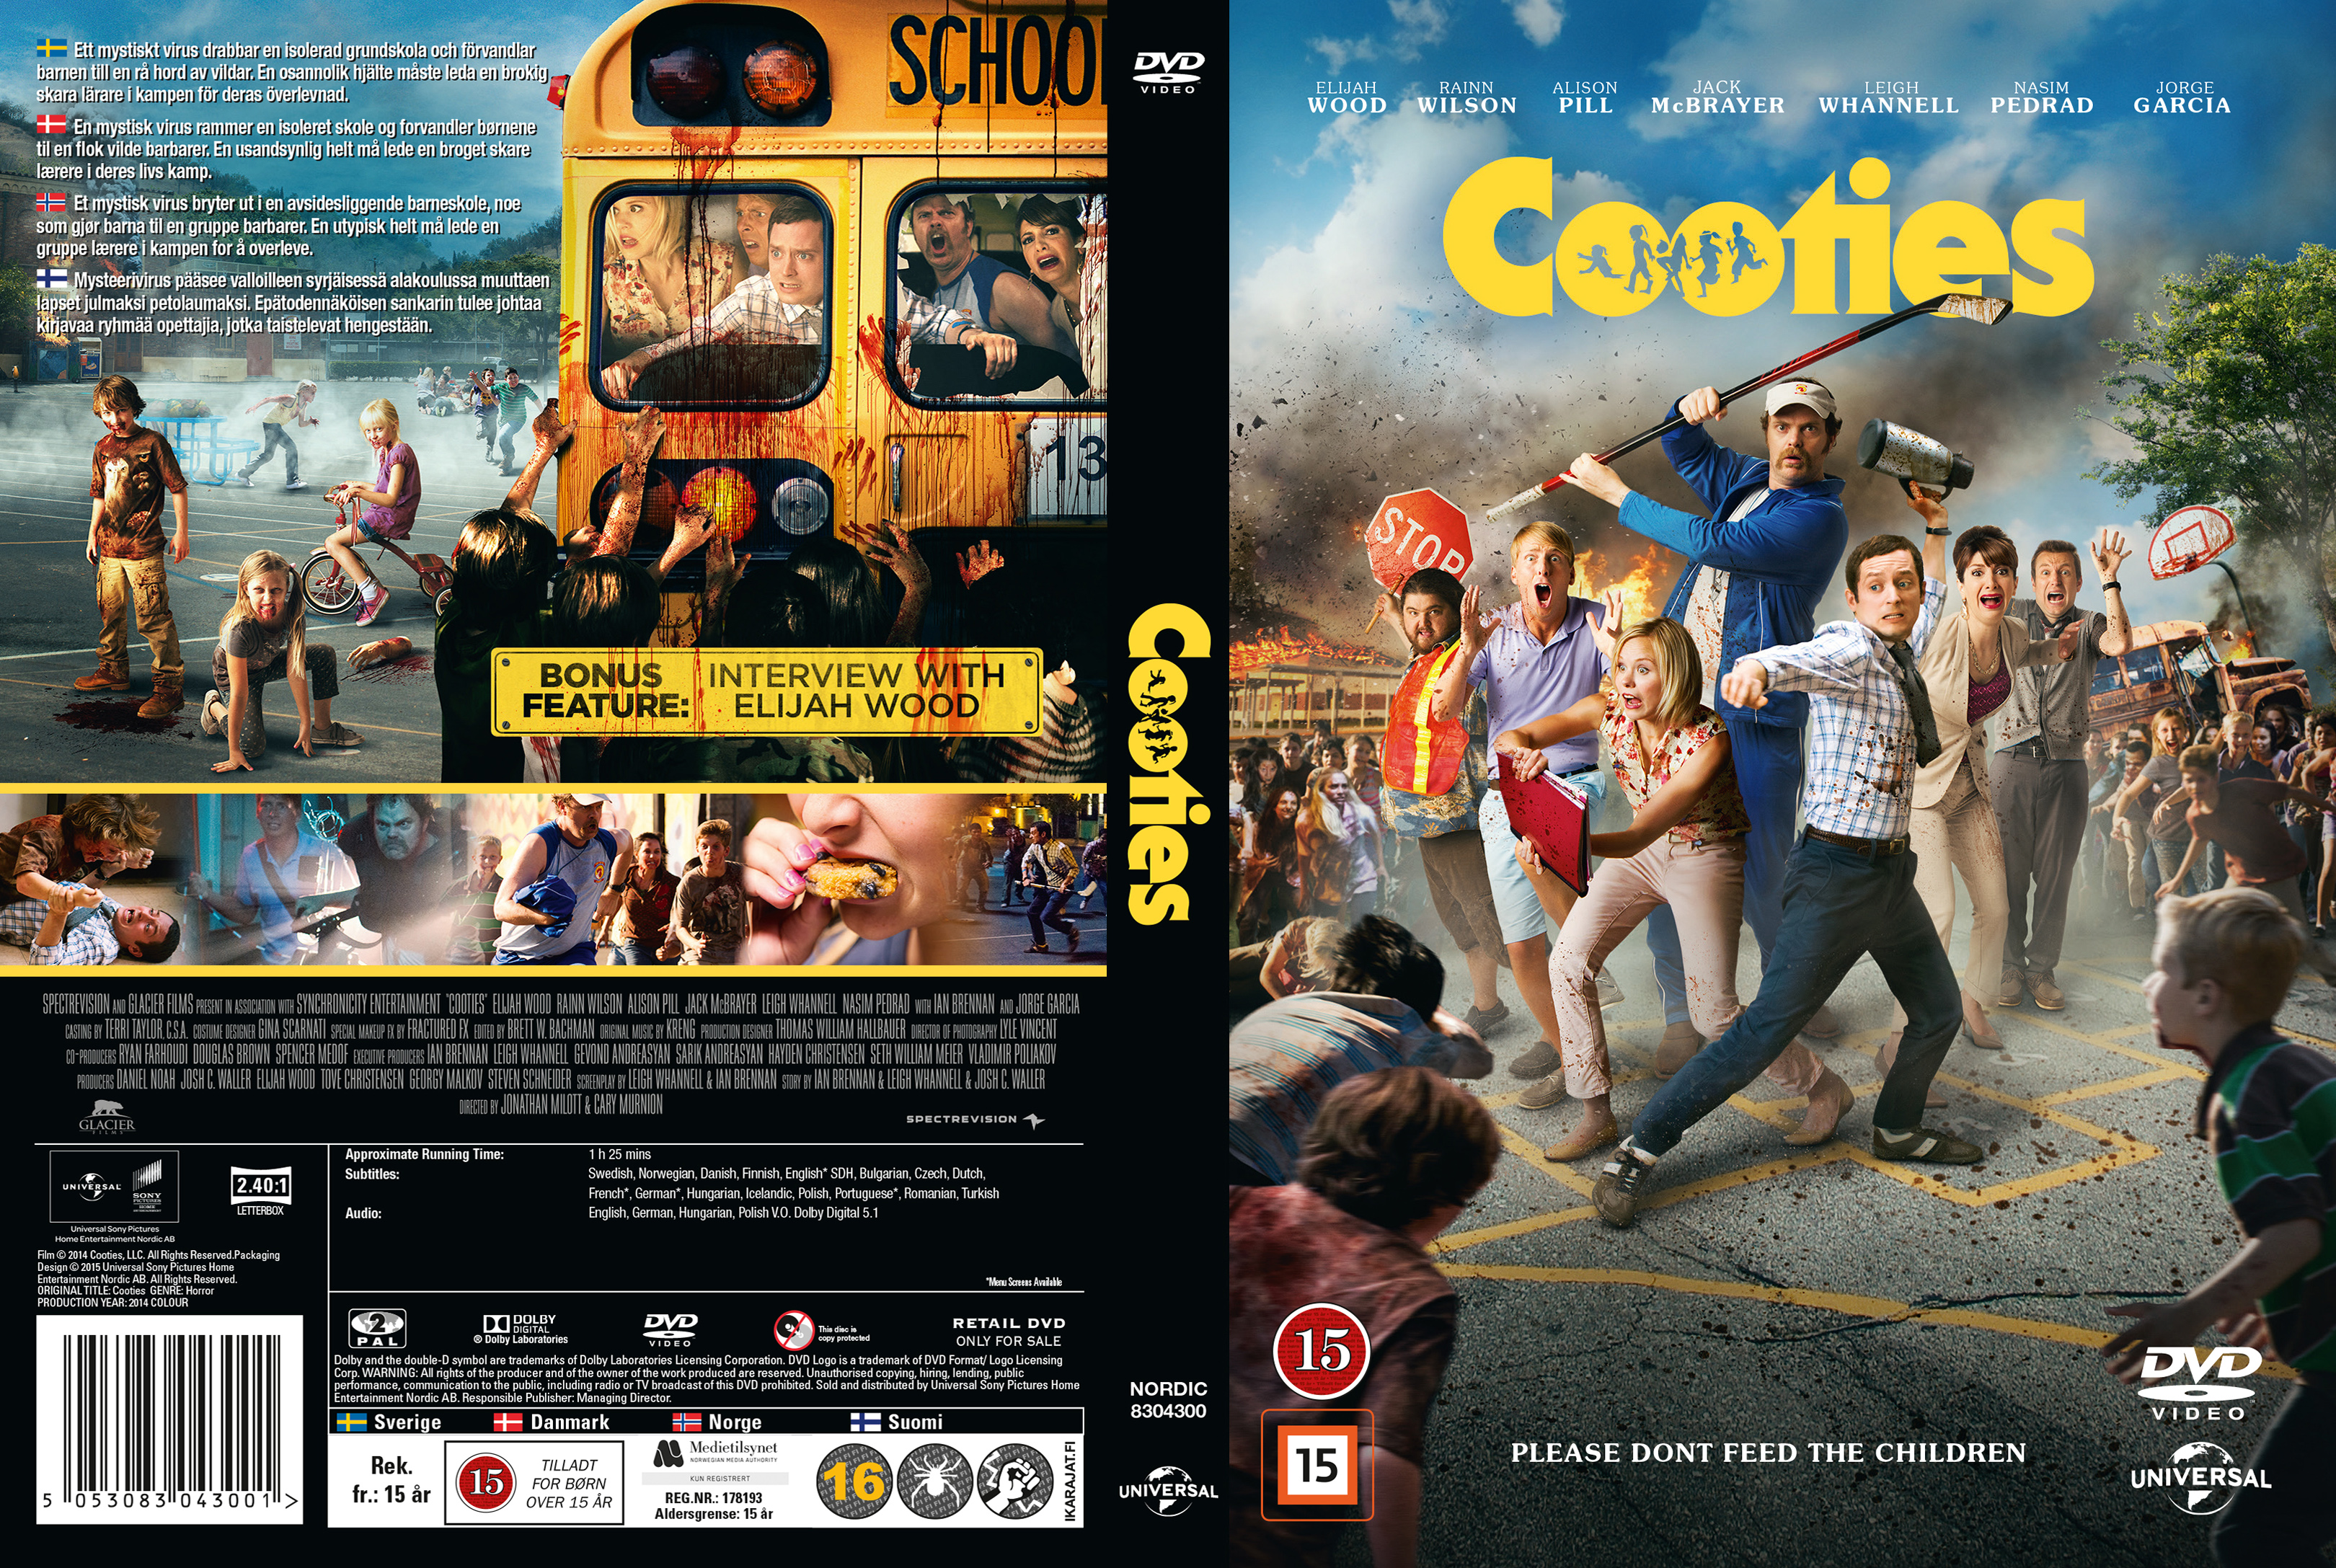 how many stars for movie cooties